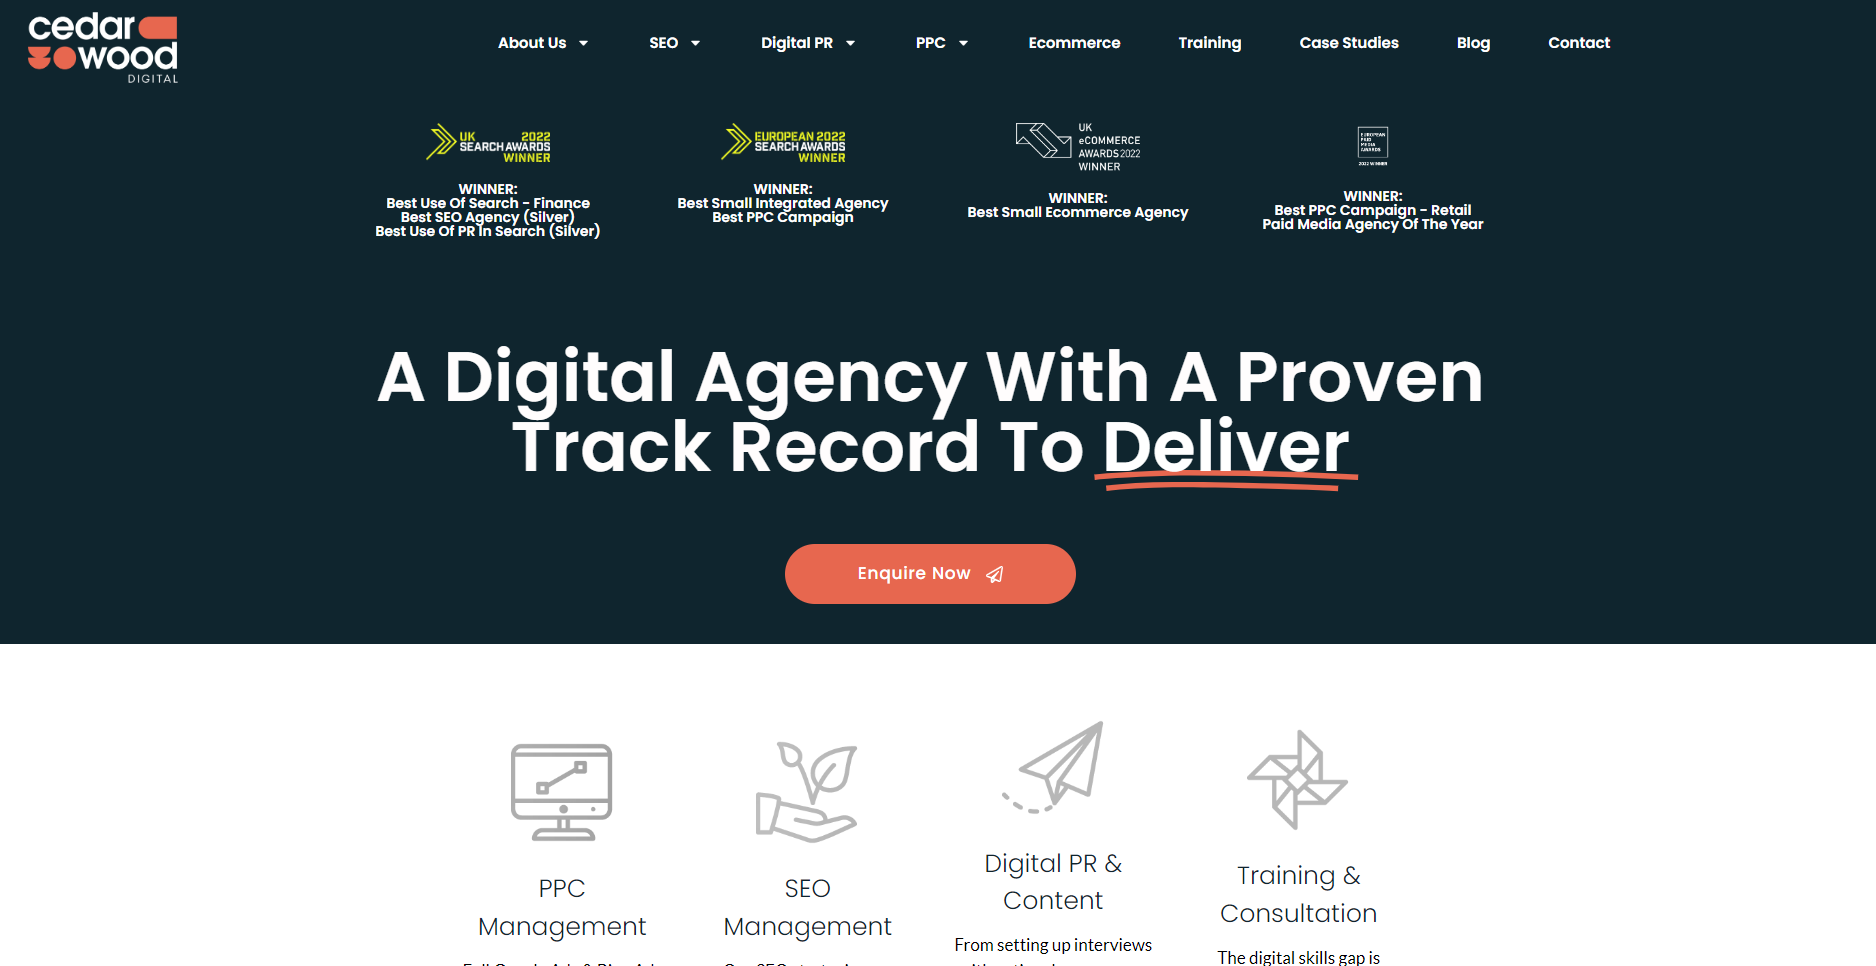 Could Cedarwood Digital be the right paid media agency for your business?